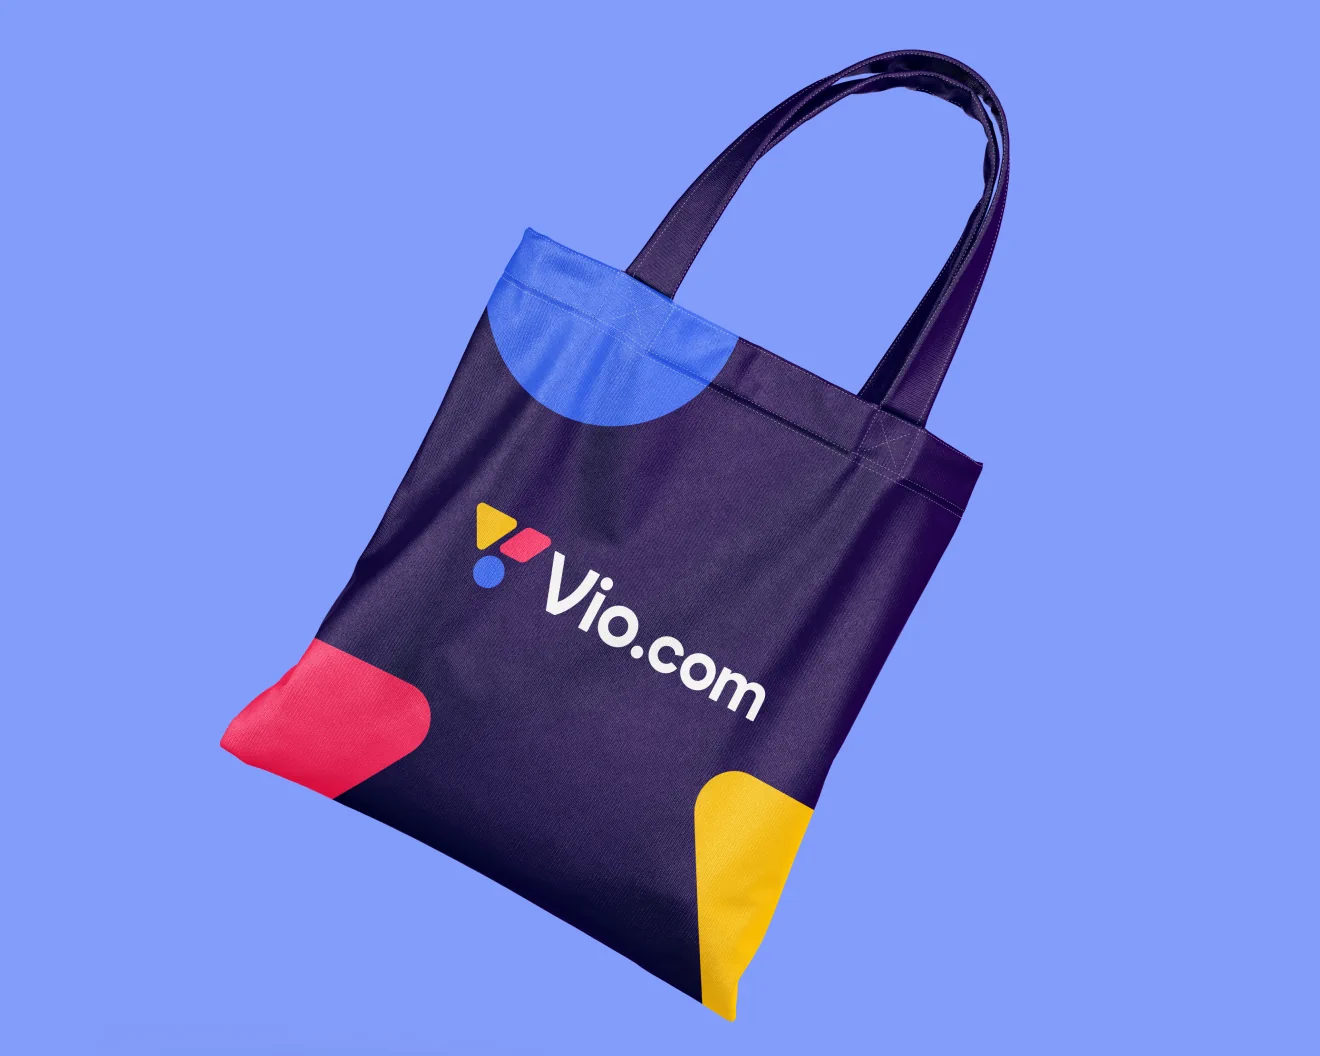 Tote bag on a light blue background. The tote bag has a dark blue color and shows  the Vio.com logo with a white logotype combined with a white logo mark consisting of three colored shapes. On three of the four tote bag's corners are large partially cut off colored shapes